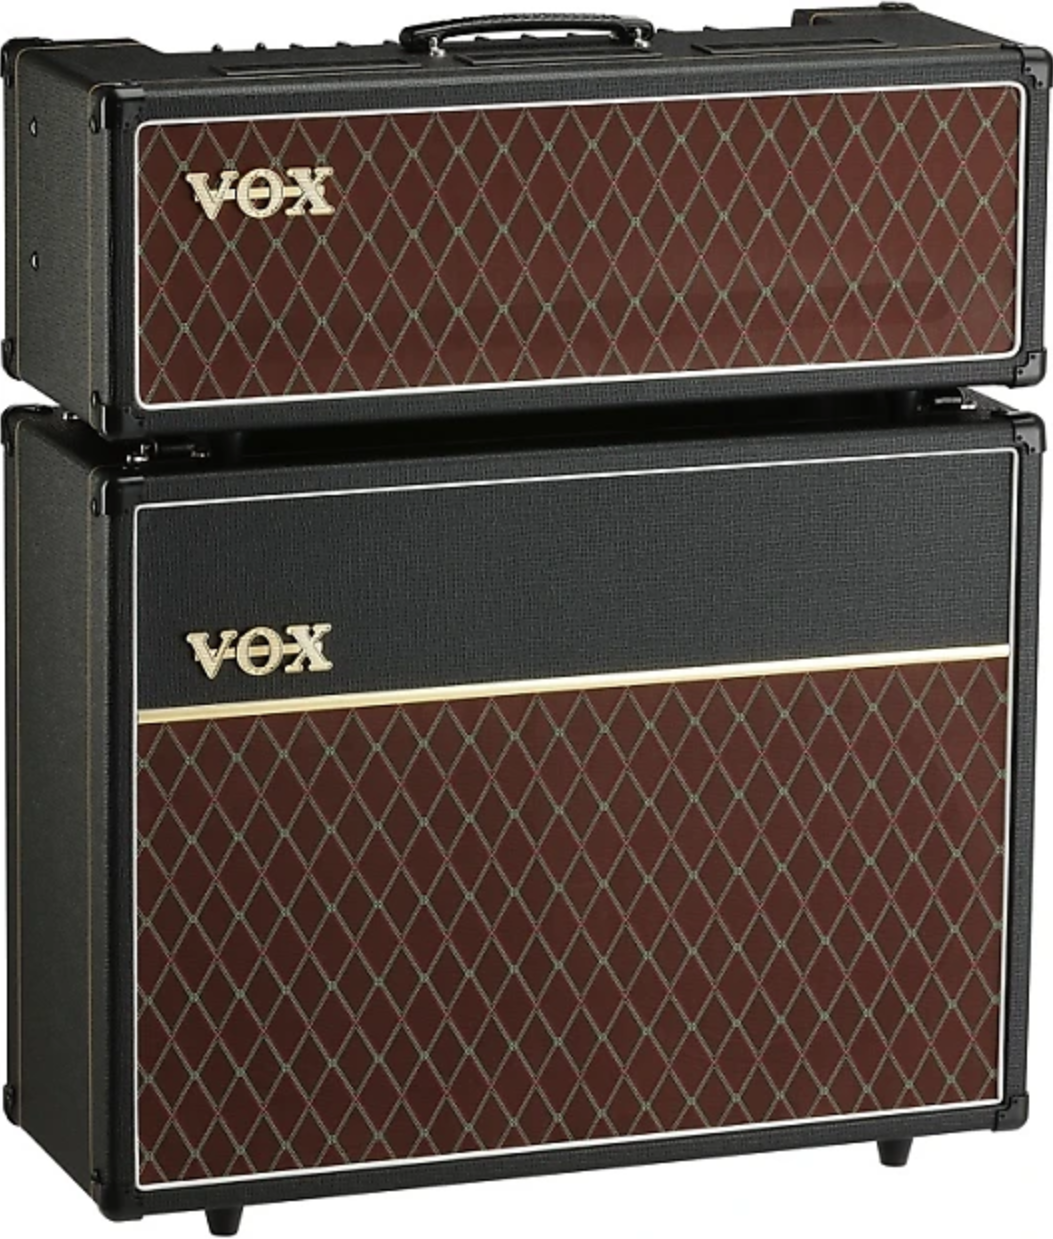 The Vox AC30 stack 30-watt tube head with matching 2x12" cabinet.